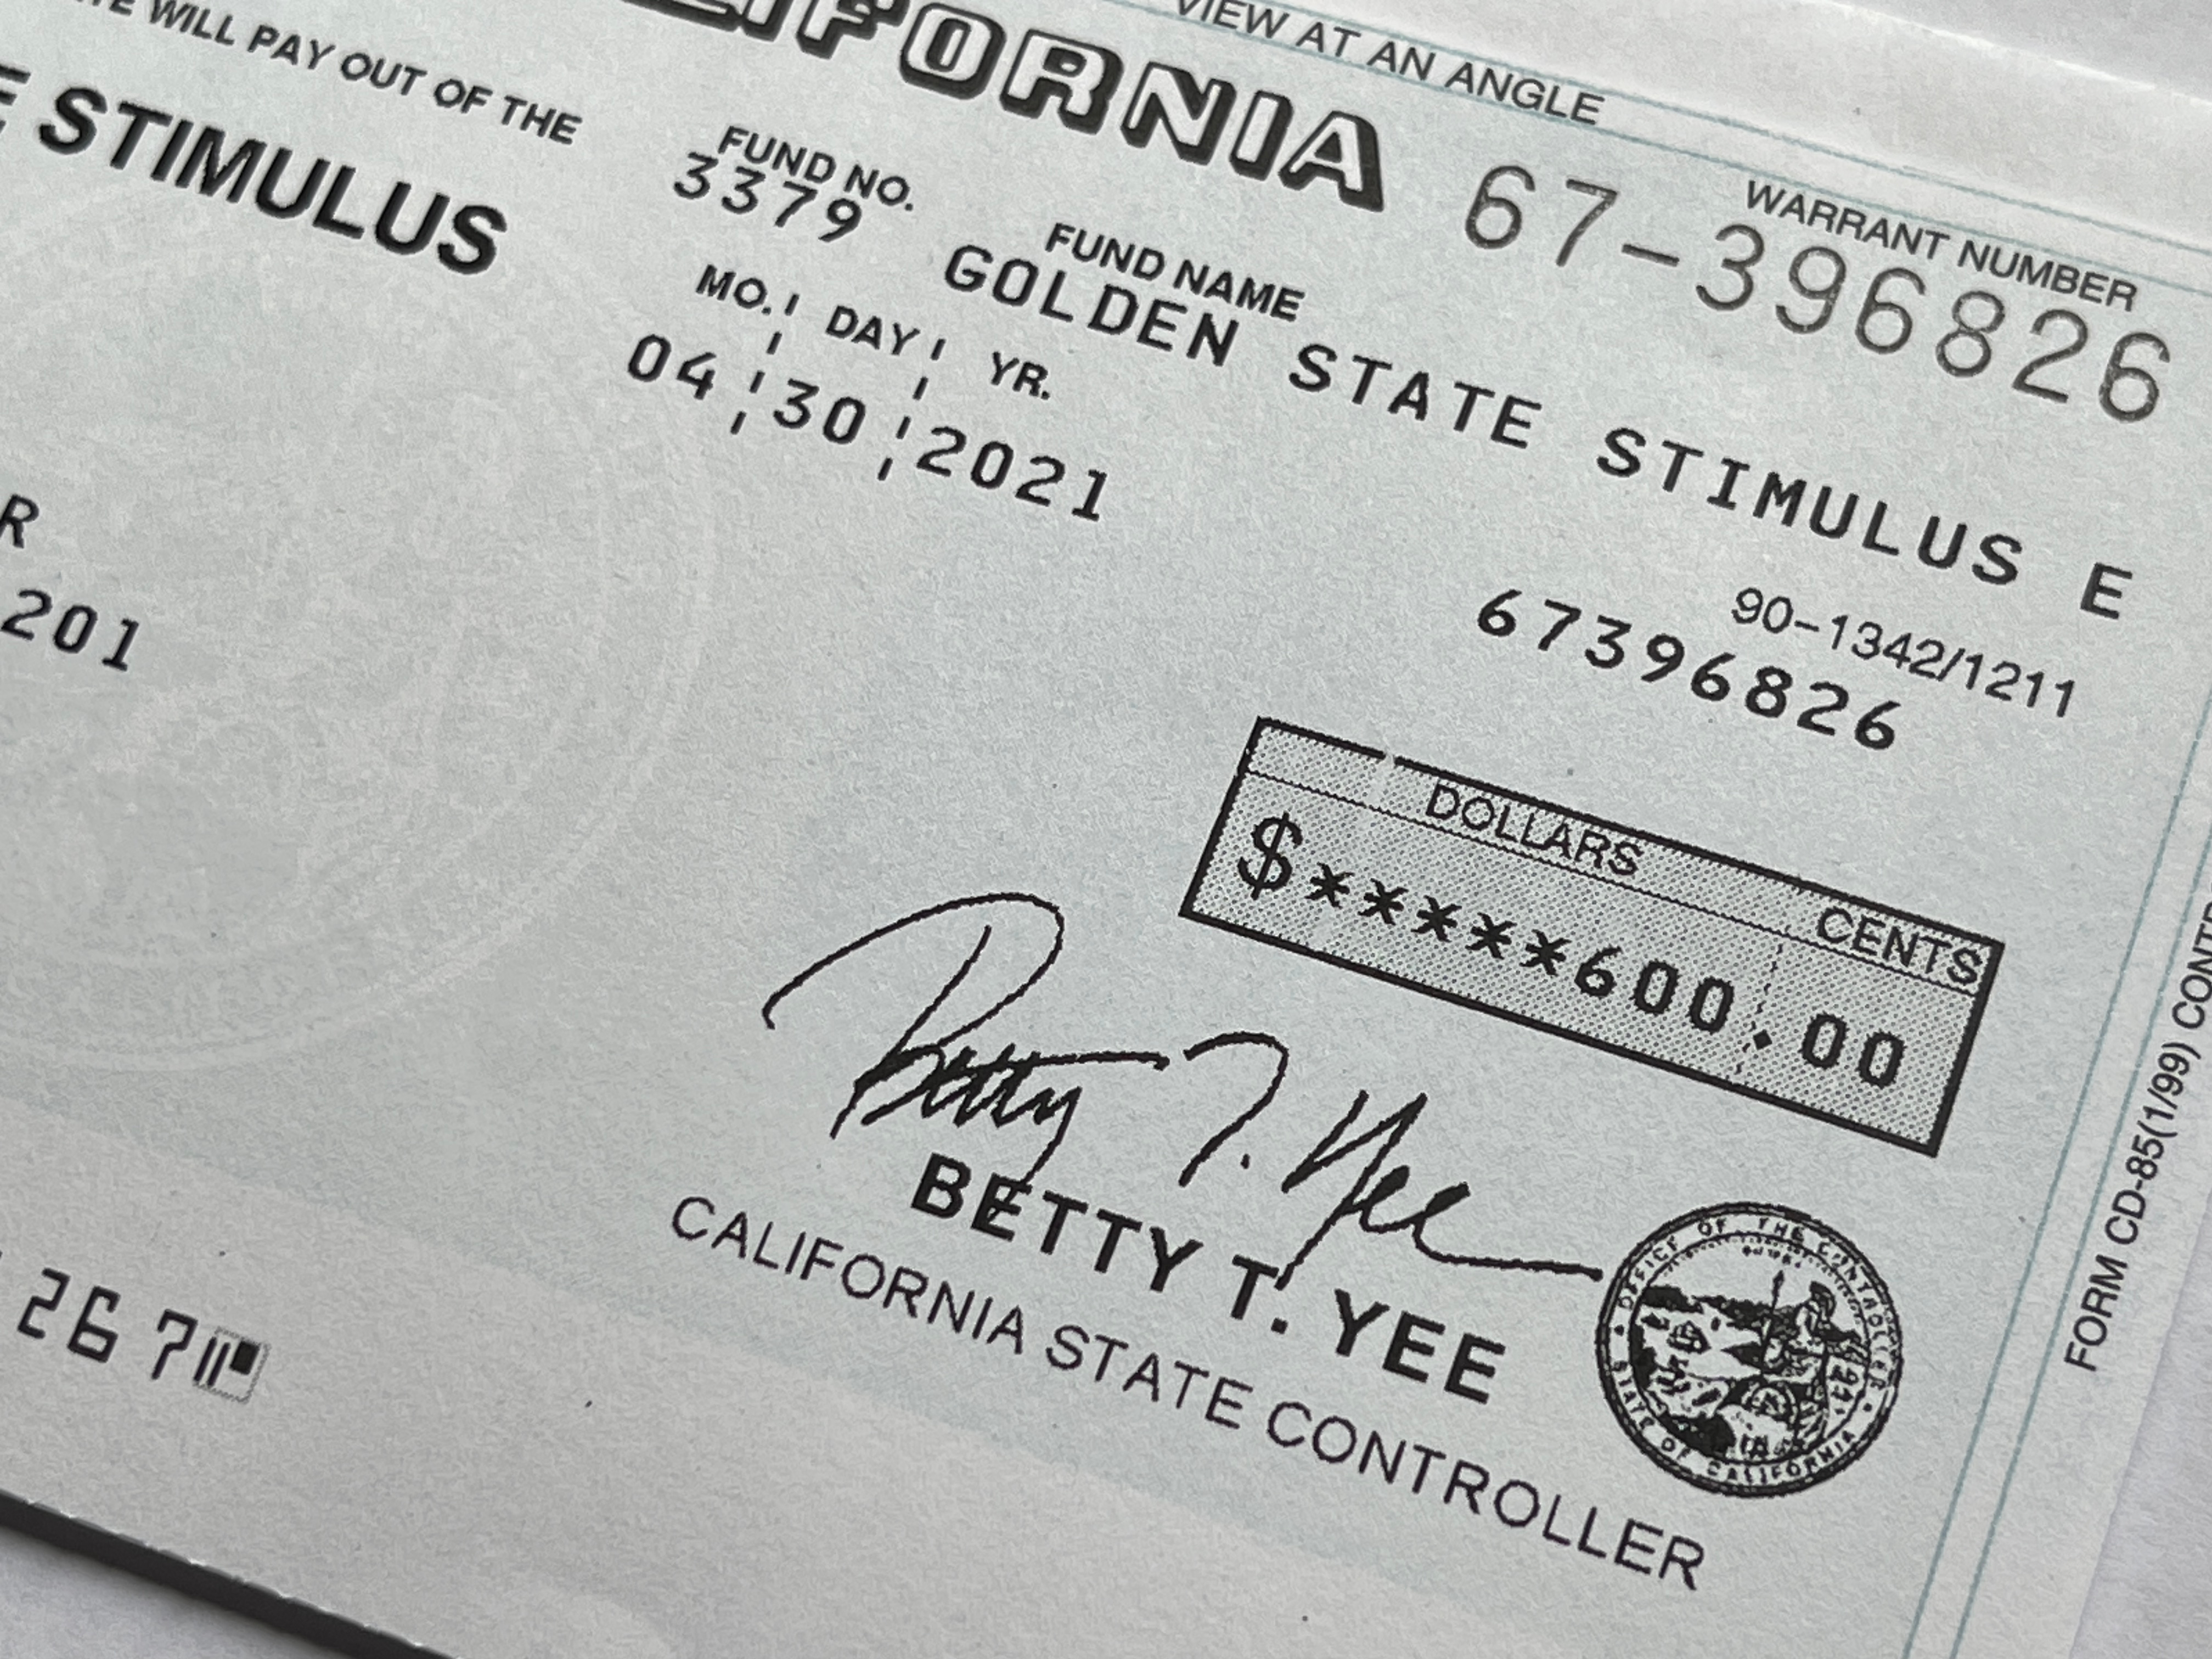 Stimulus check in California: how to avoid scams that seek to steal your money